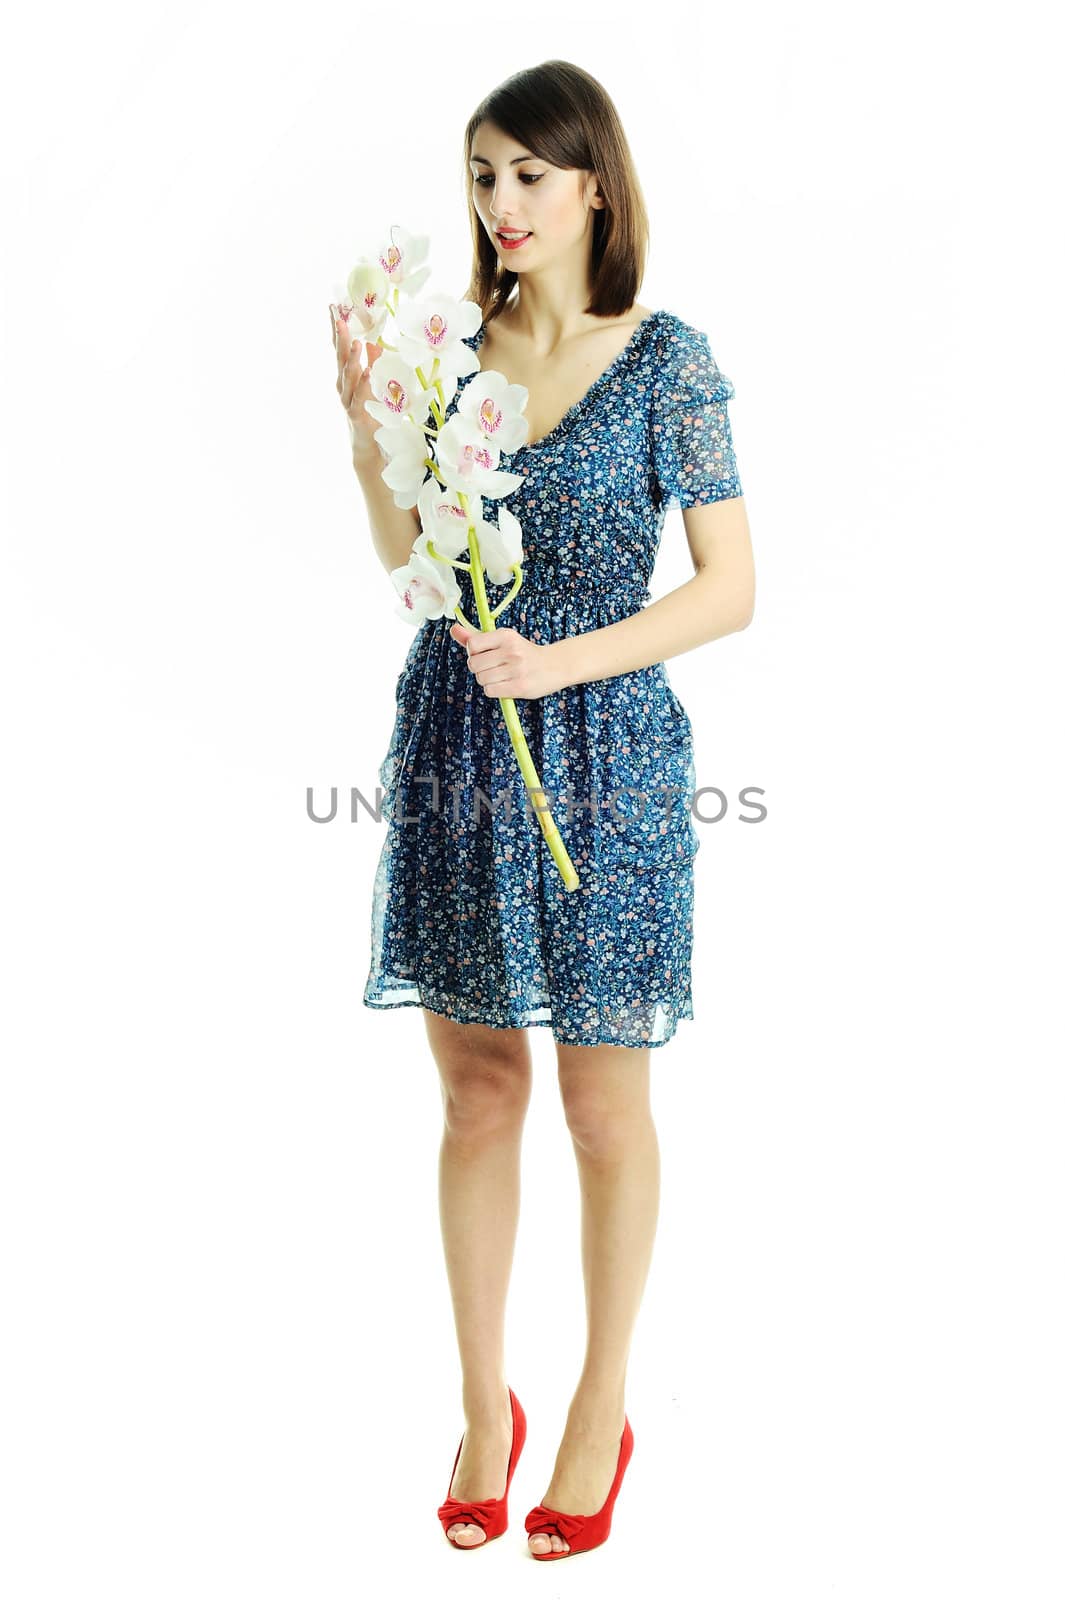 An image of a young pretty woman with flowers